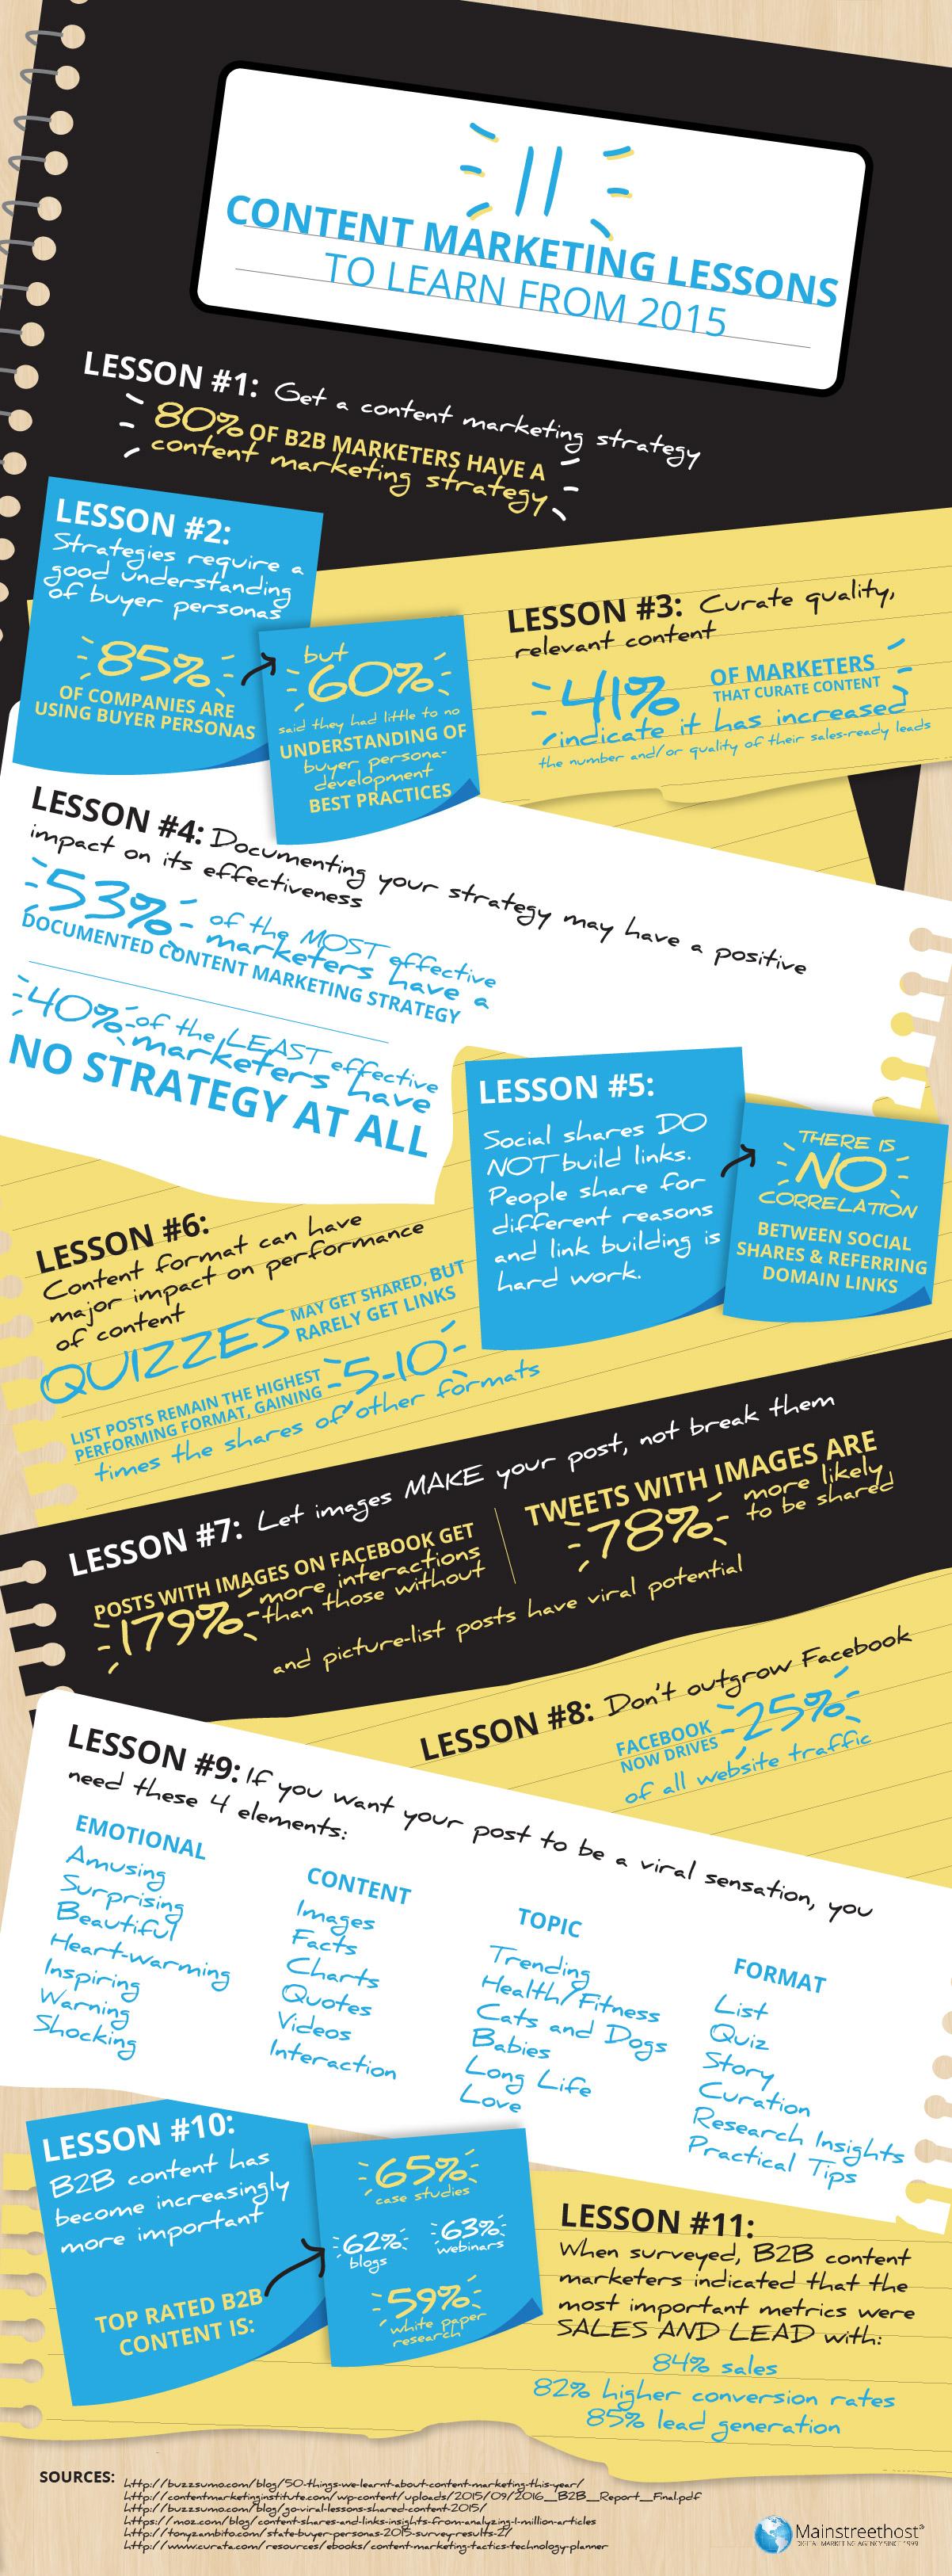 11 Content Marketing Lessons Infographic